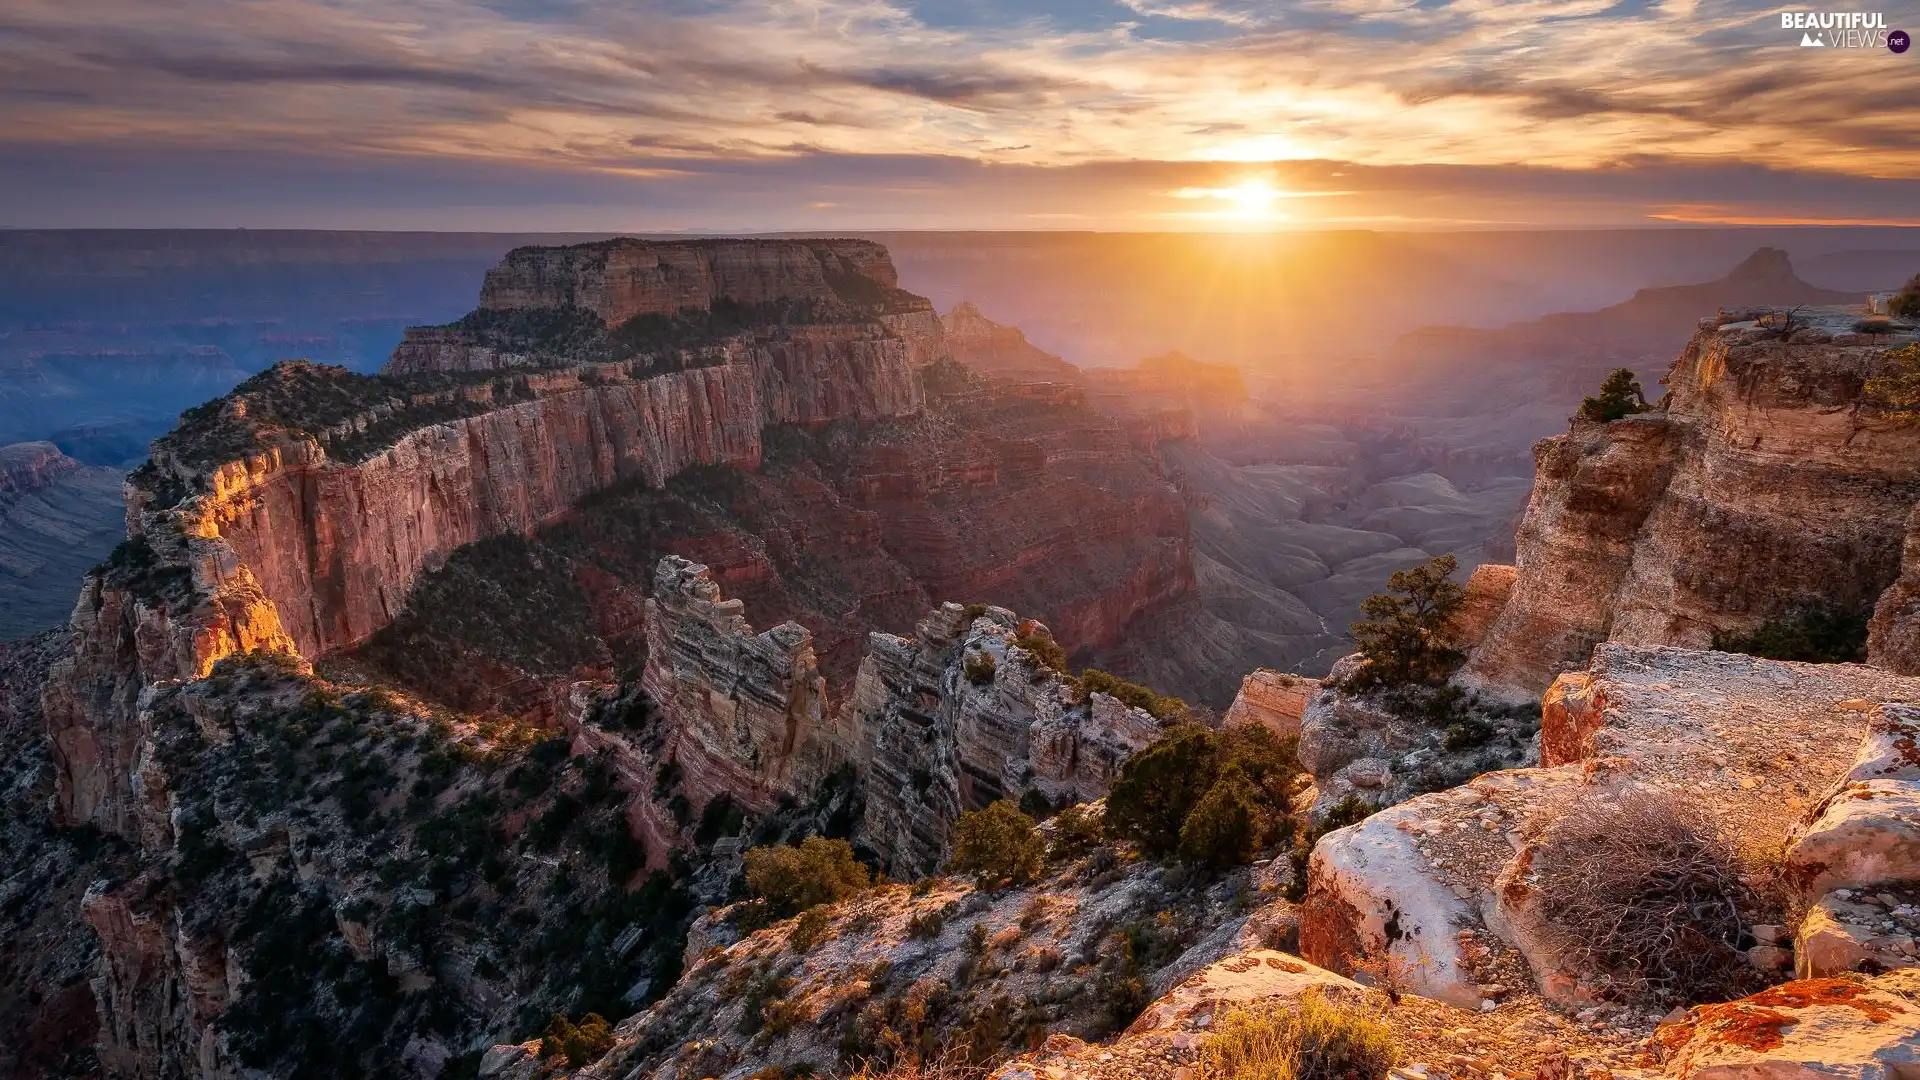 Great Sunsets, The United States, Grand Canyon, rocks, Grand Canyon National Park